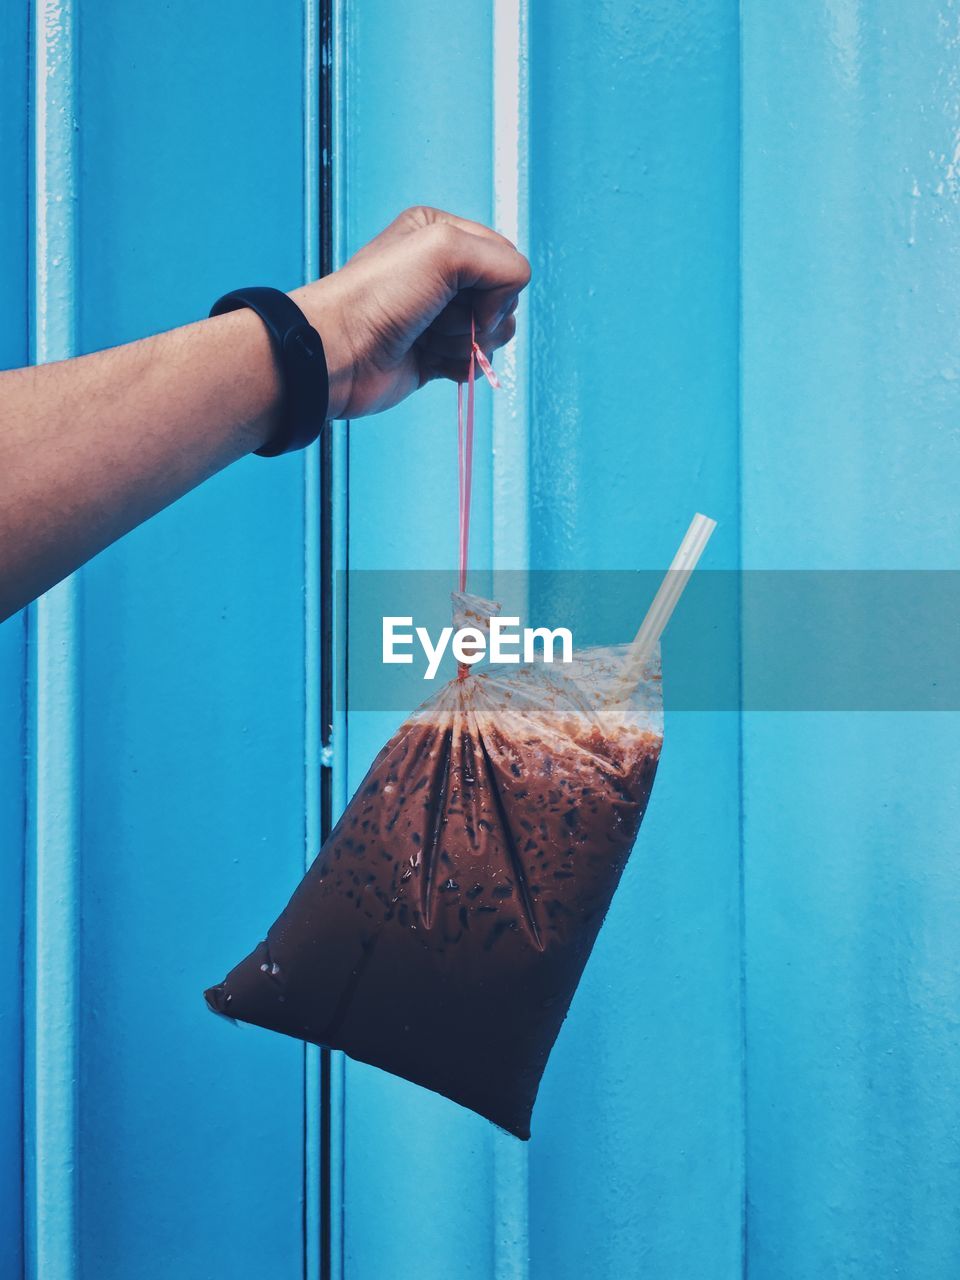 Cropped hand holding smoothie in plastic bag against wall